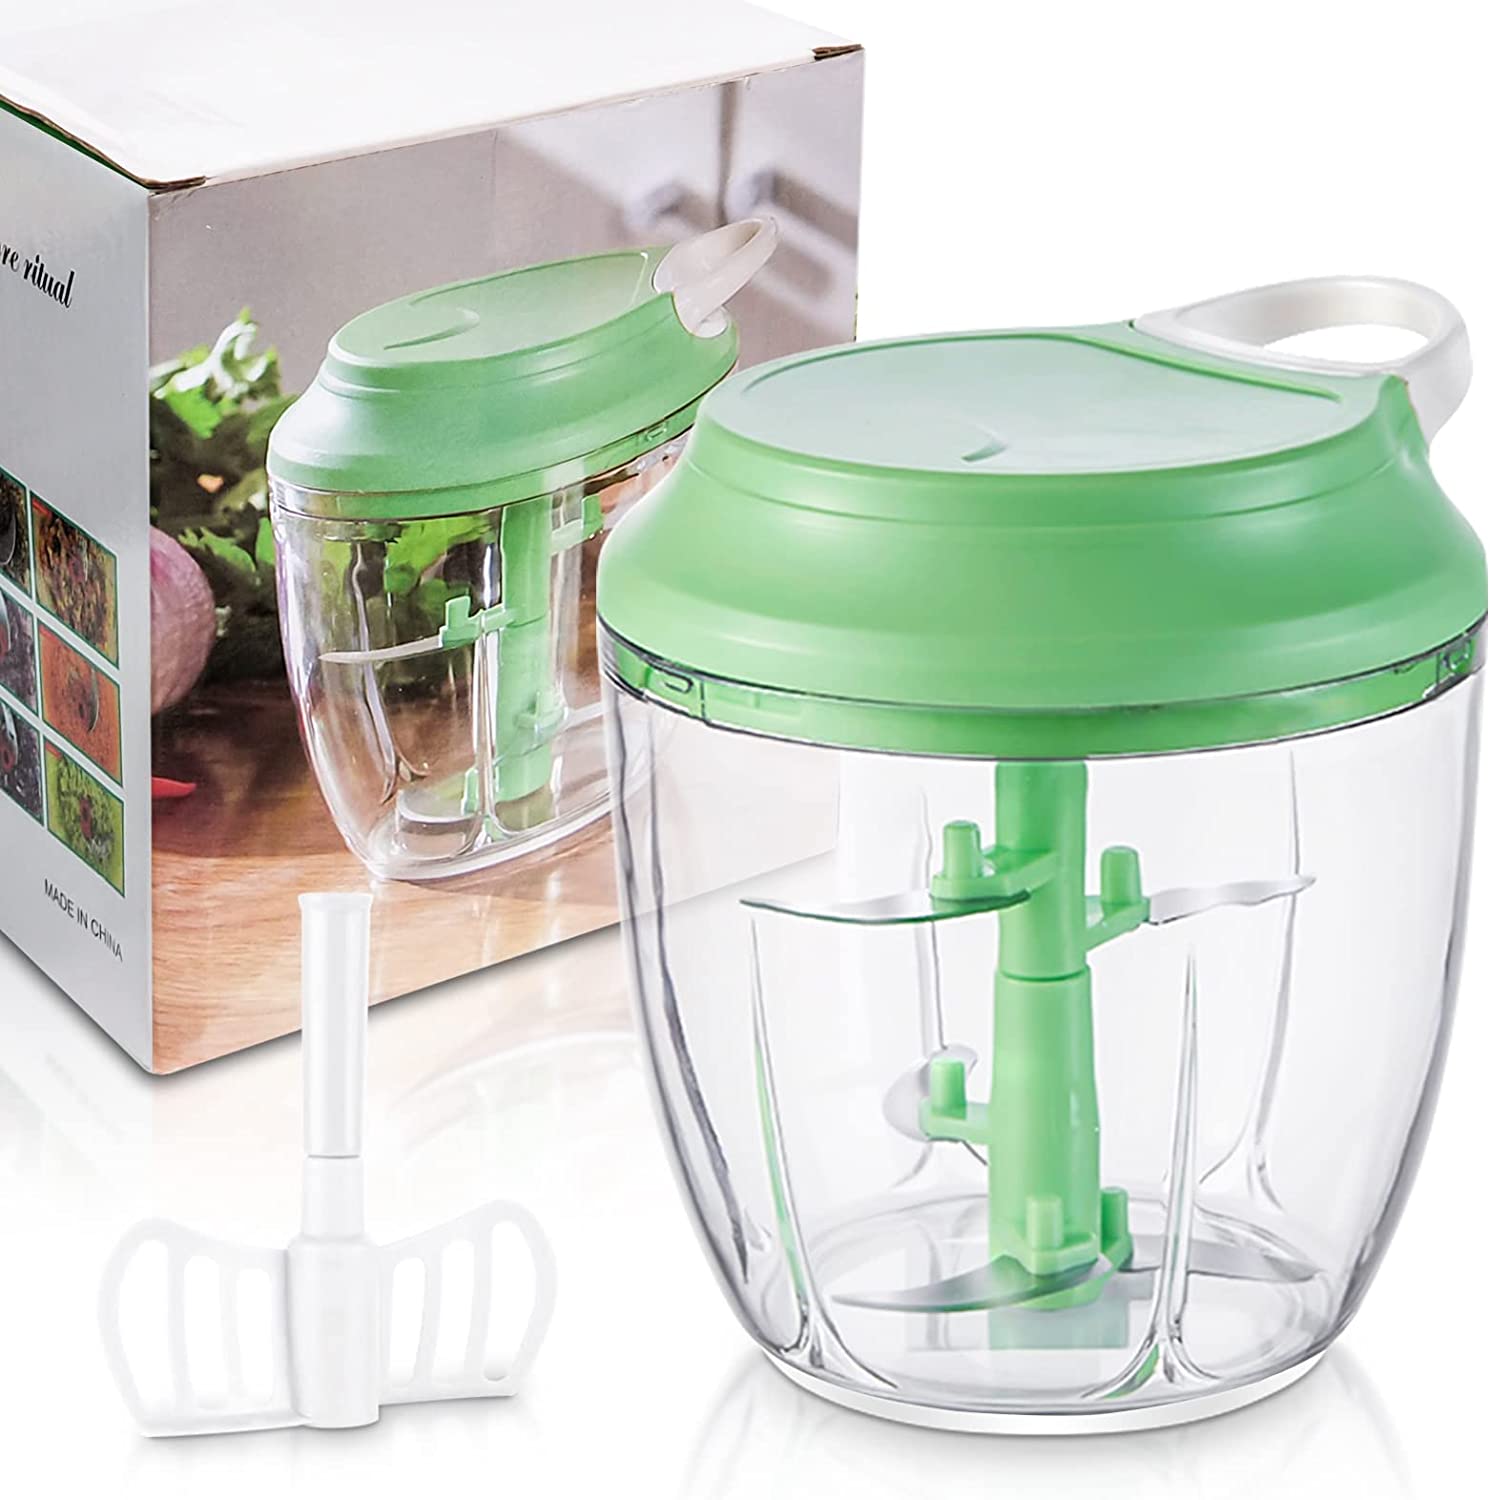 LIVESTN Manual Chopper 900 ml 2-in-1 Onion Cutter Manual Portable Food Processor Easy to Pull Quick Effortless Universal Chopper for Onions, Garlic, Vegetables, Meat